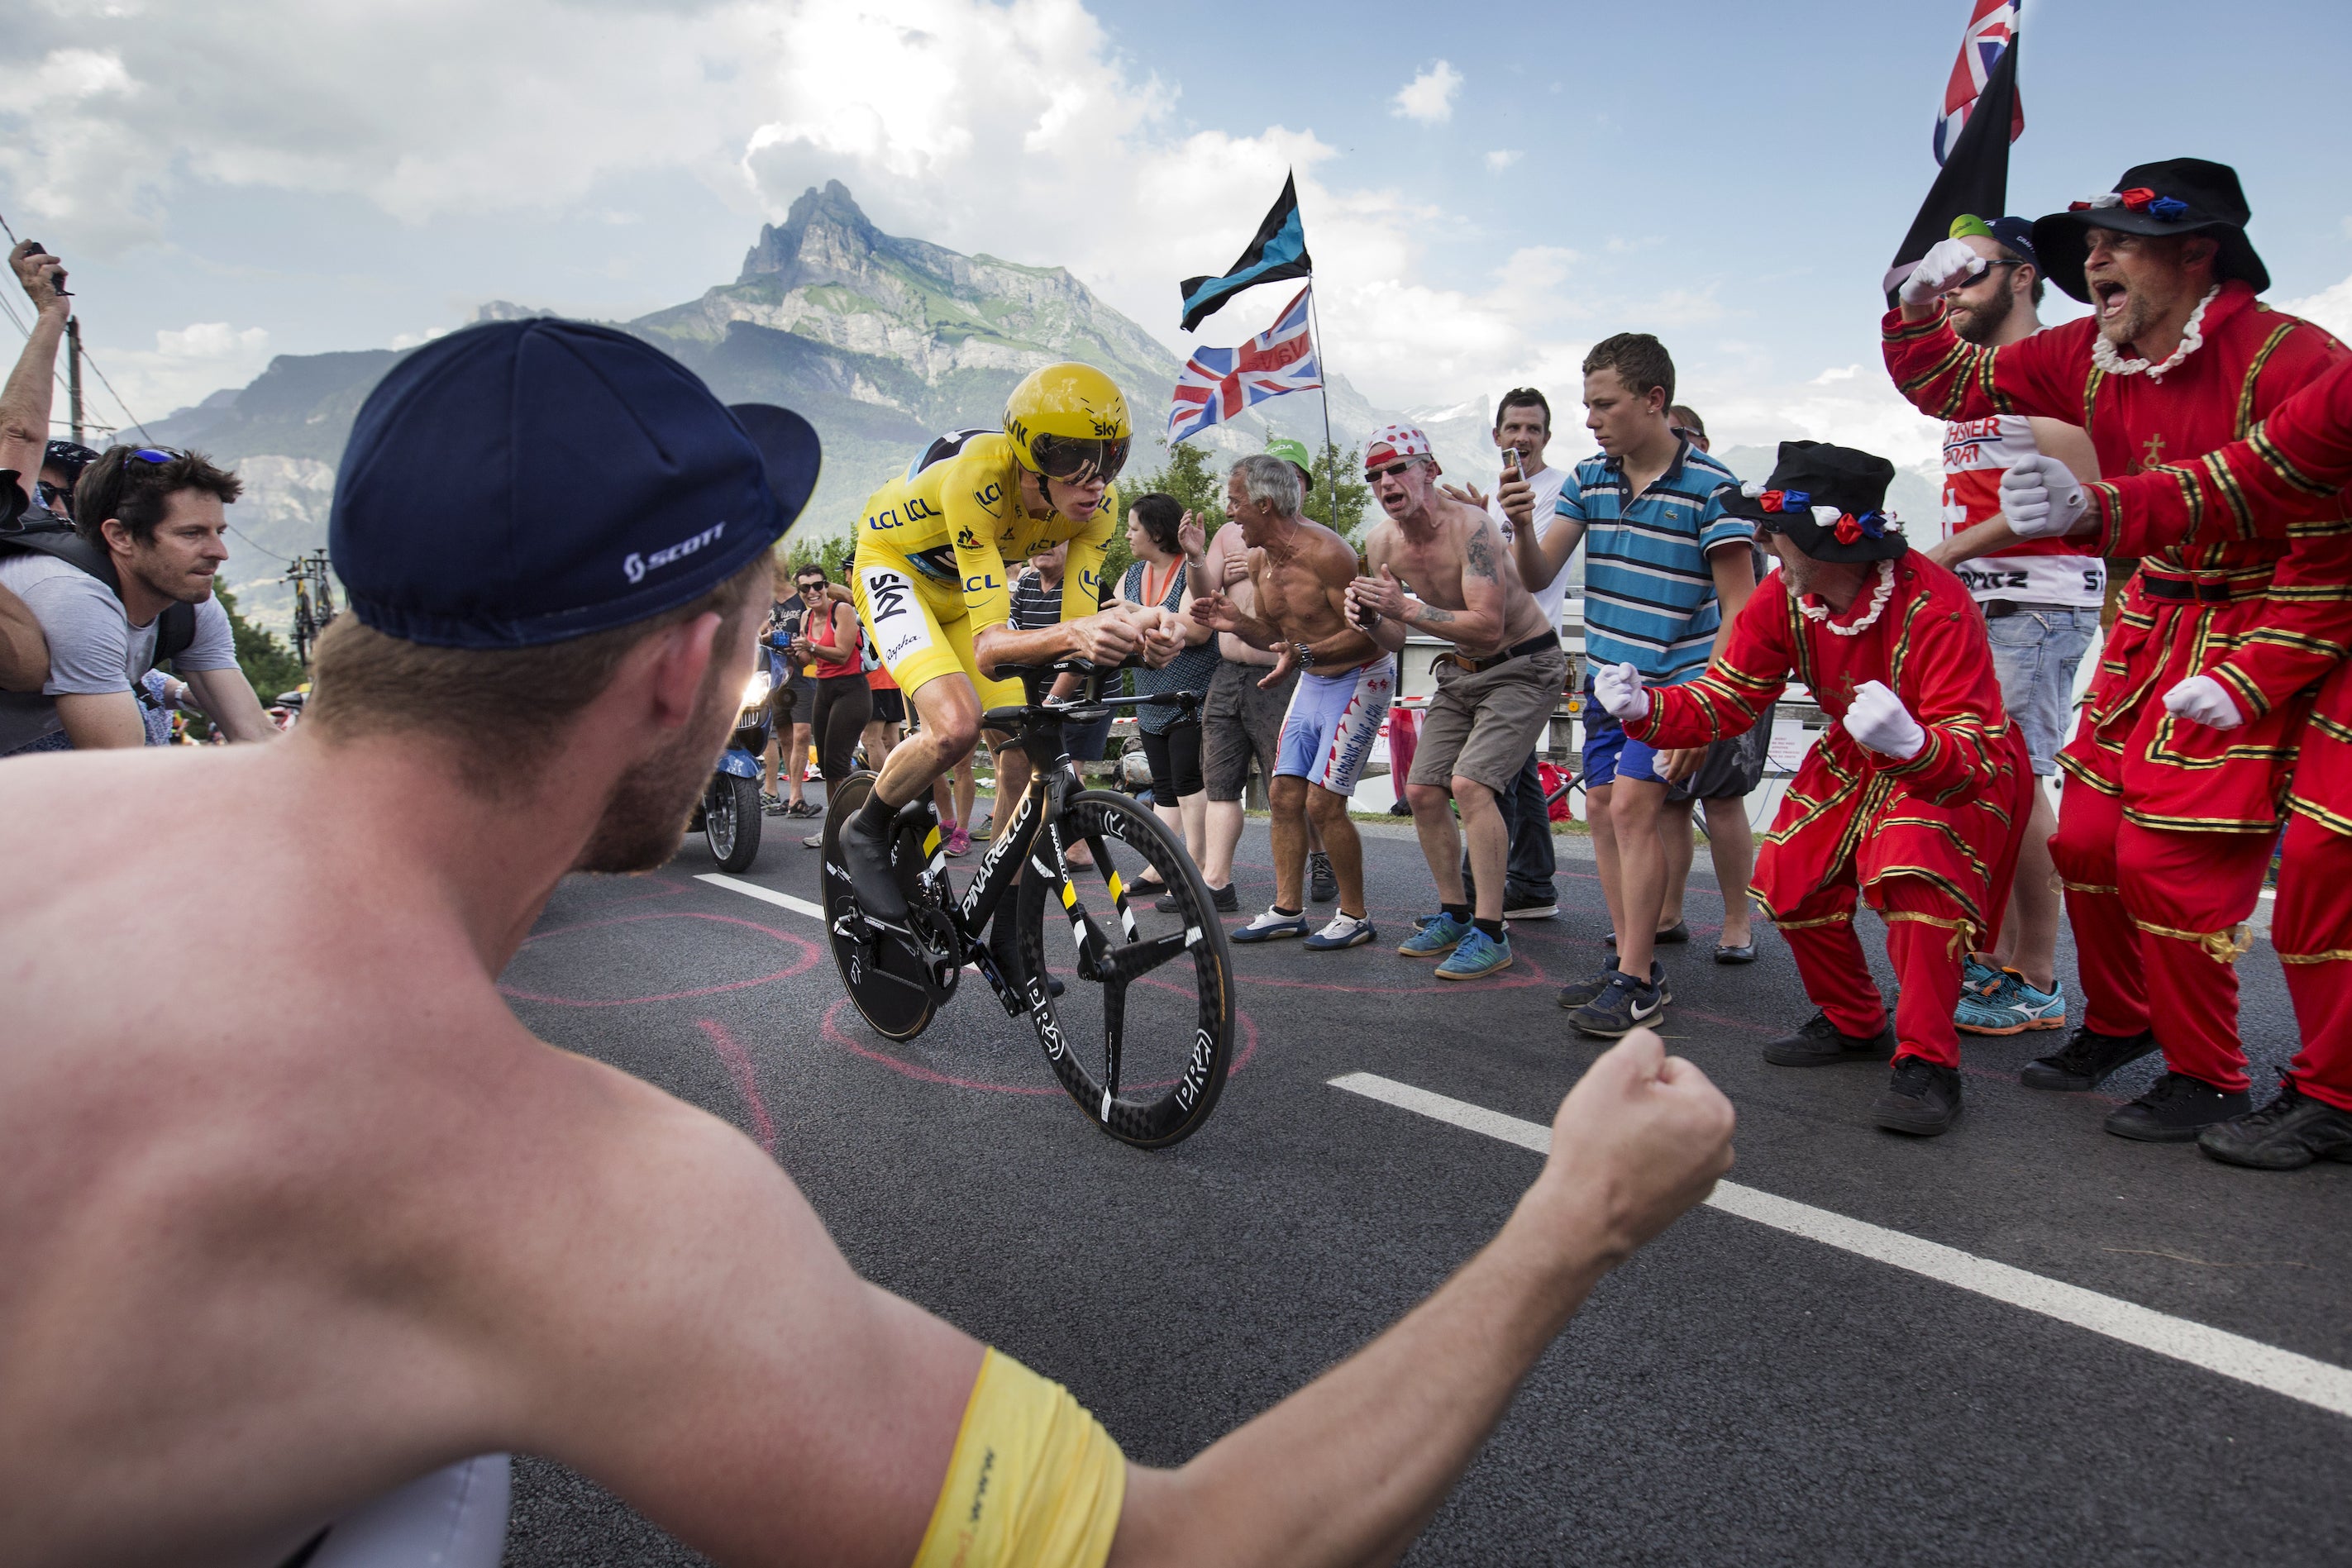 With the Tour de France Photographer on Capturing the Best Cyclists on Earth